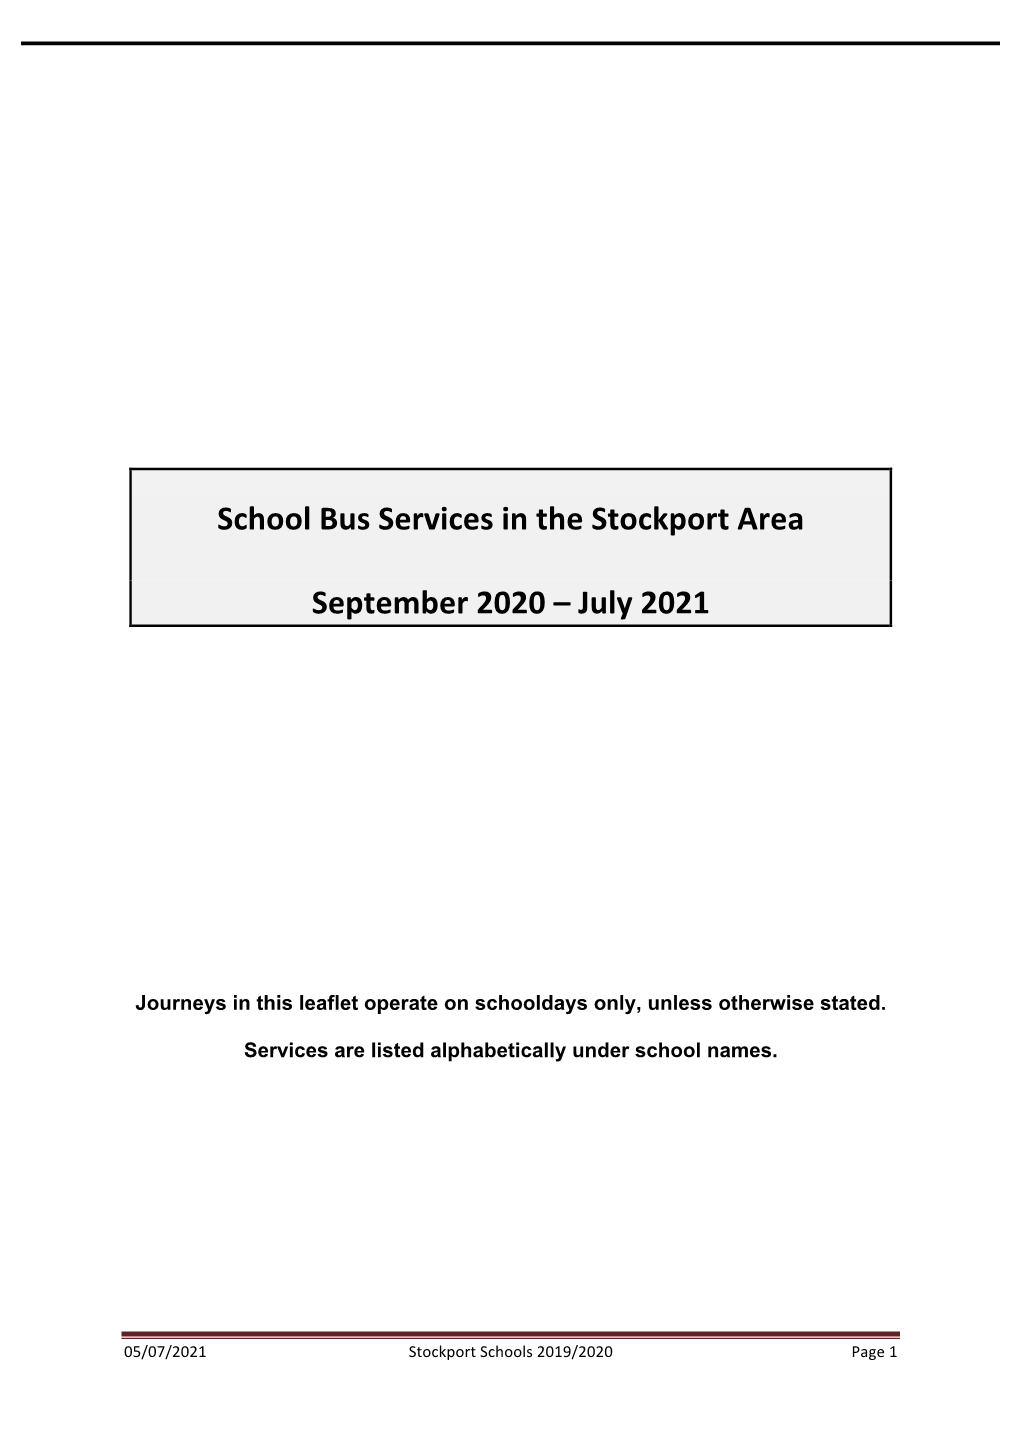 School Bus Services in the Stockport Area September 2020 – July